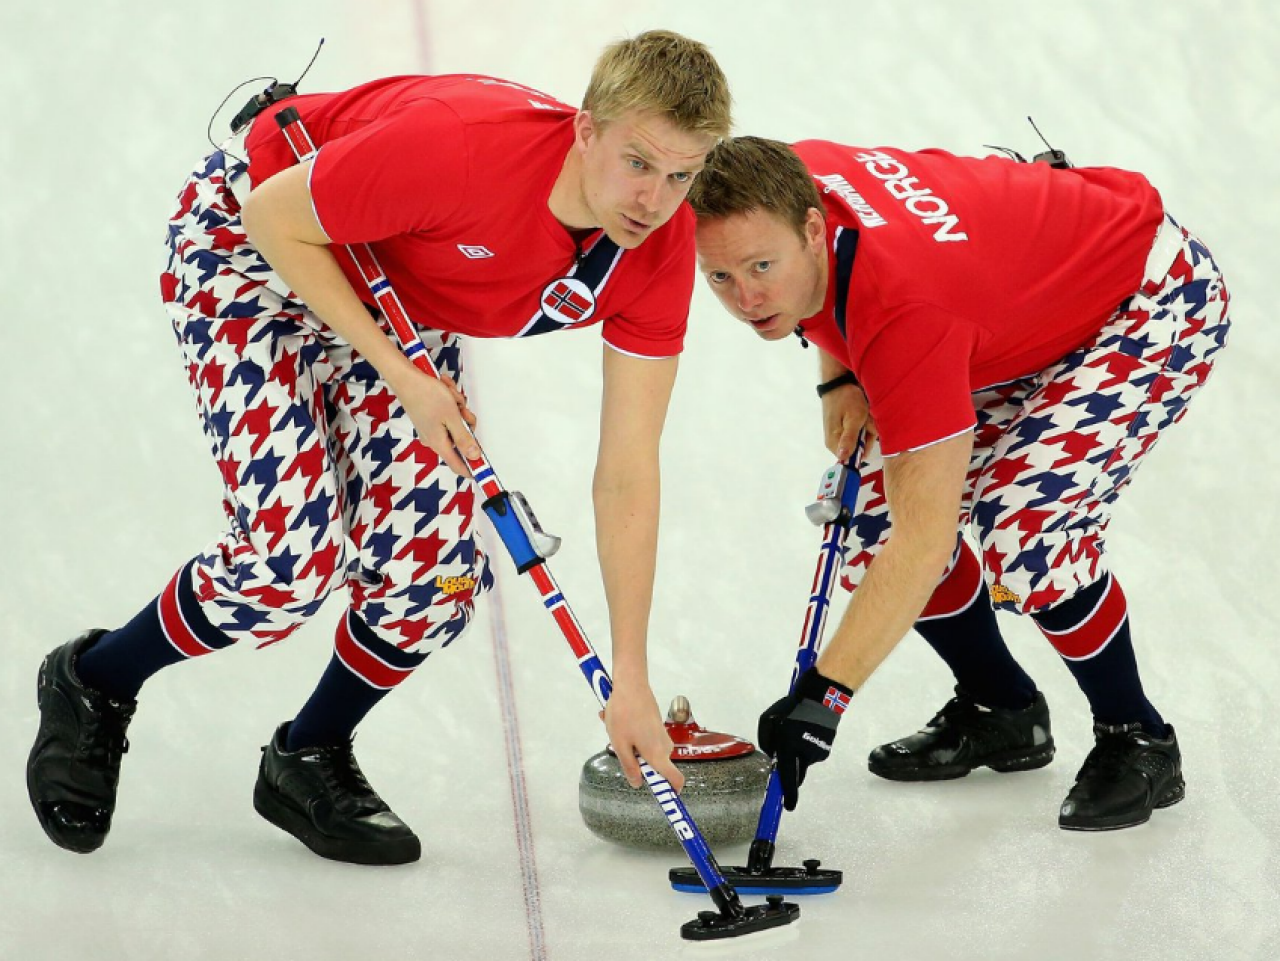 The internet is in love with the Norwegian curlers wearing